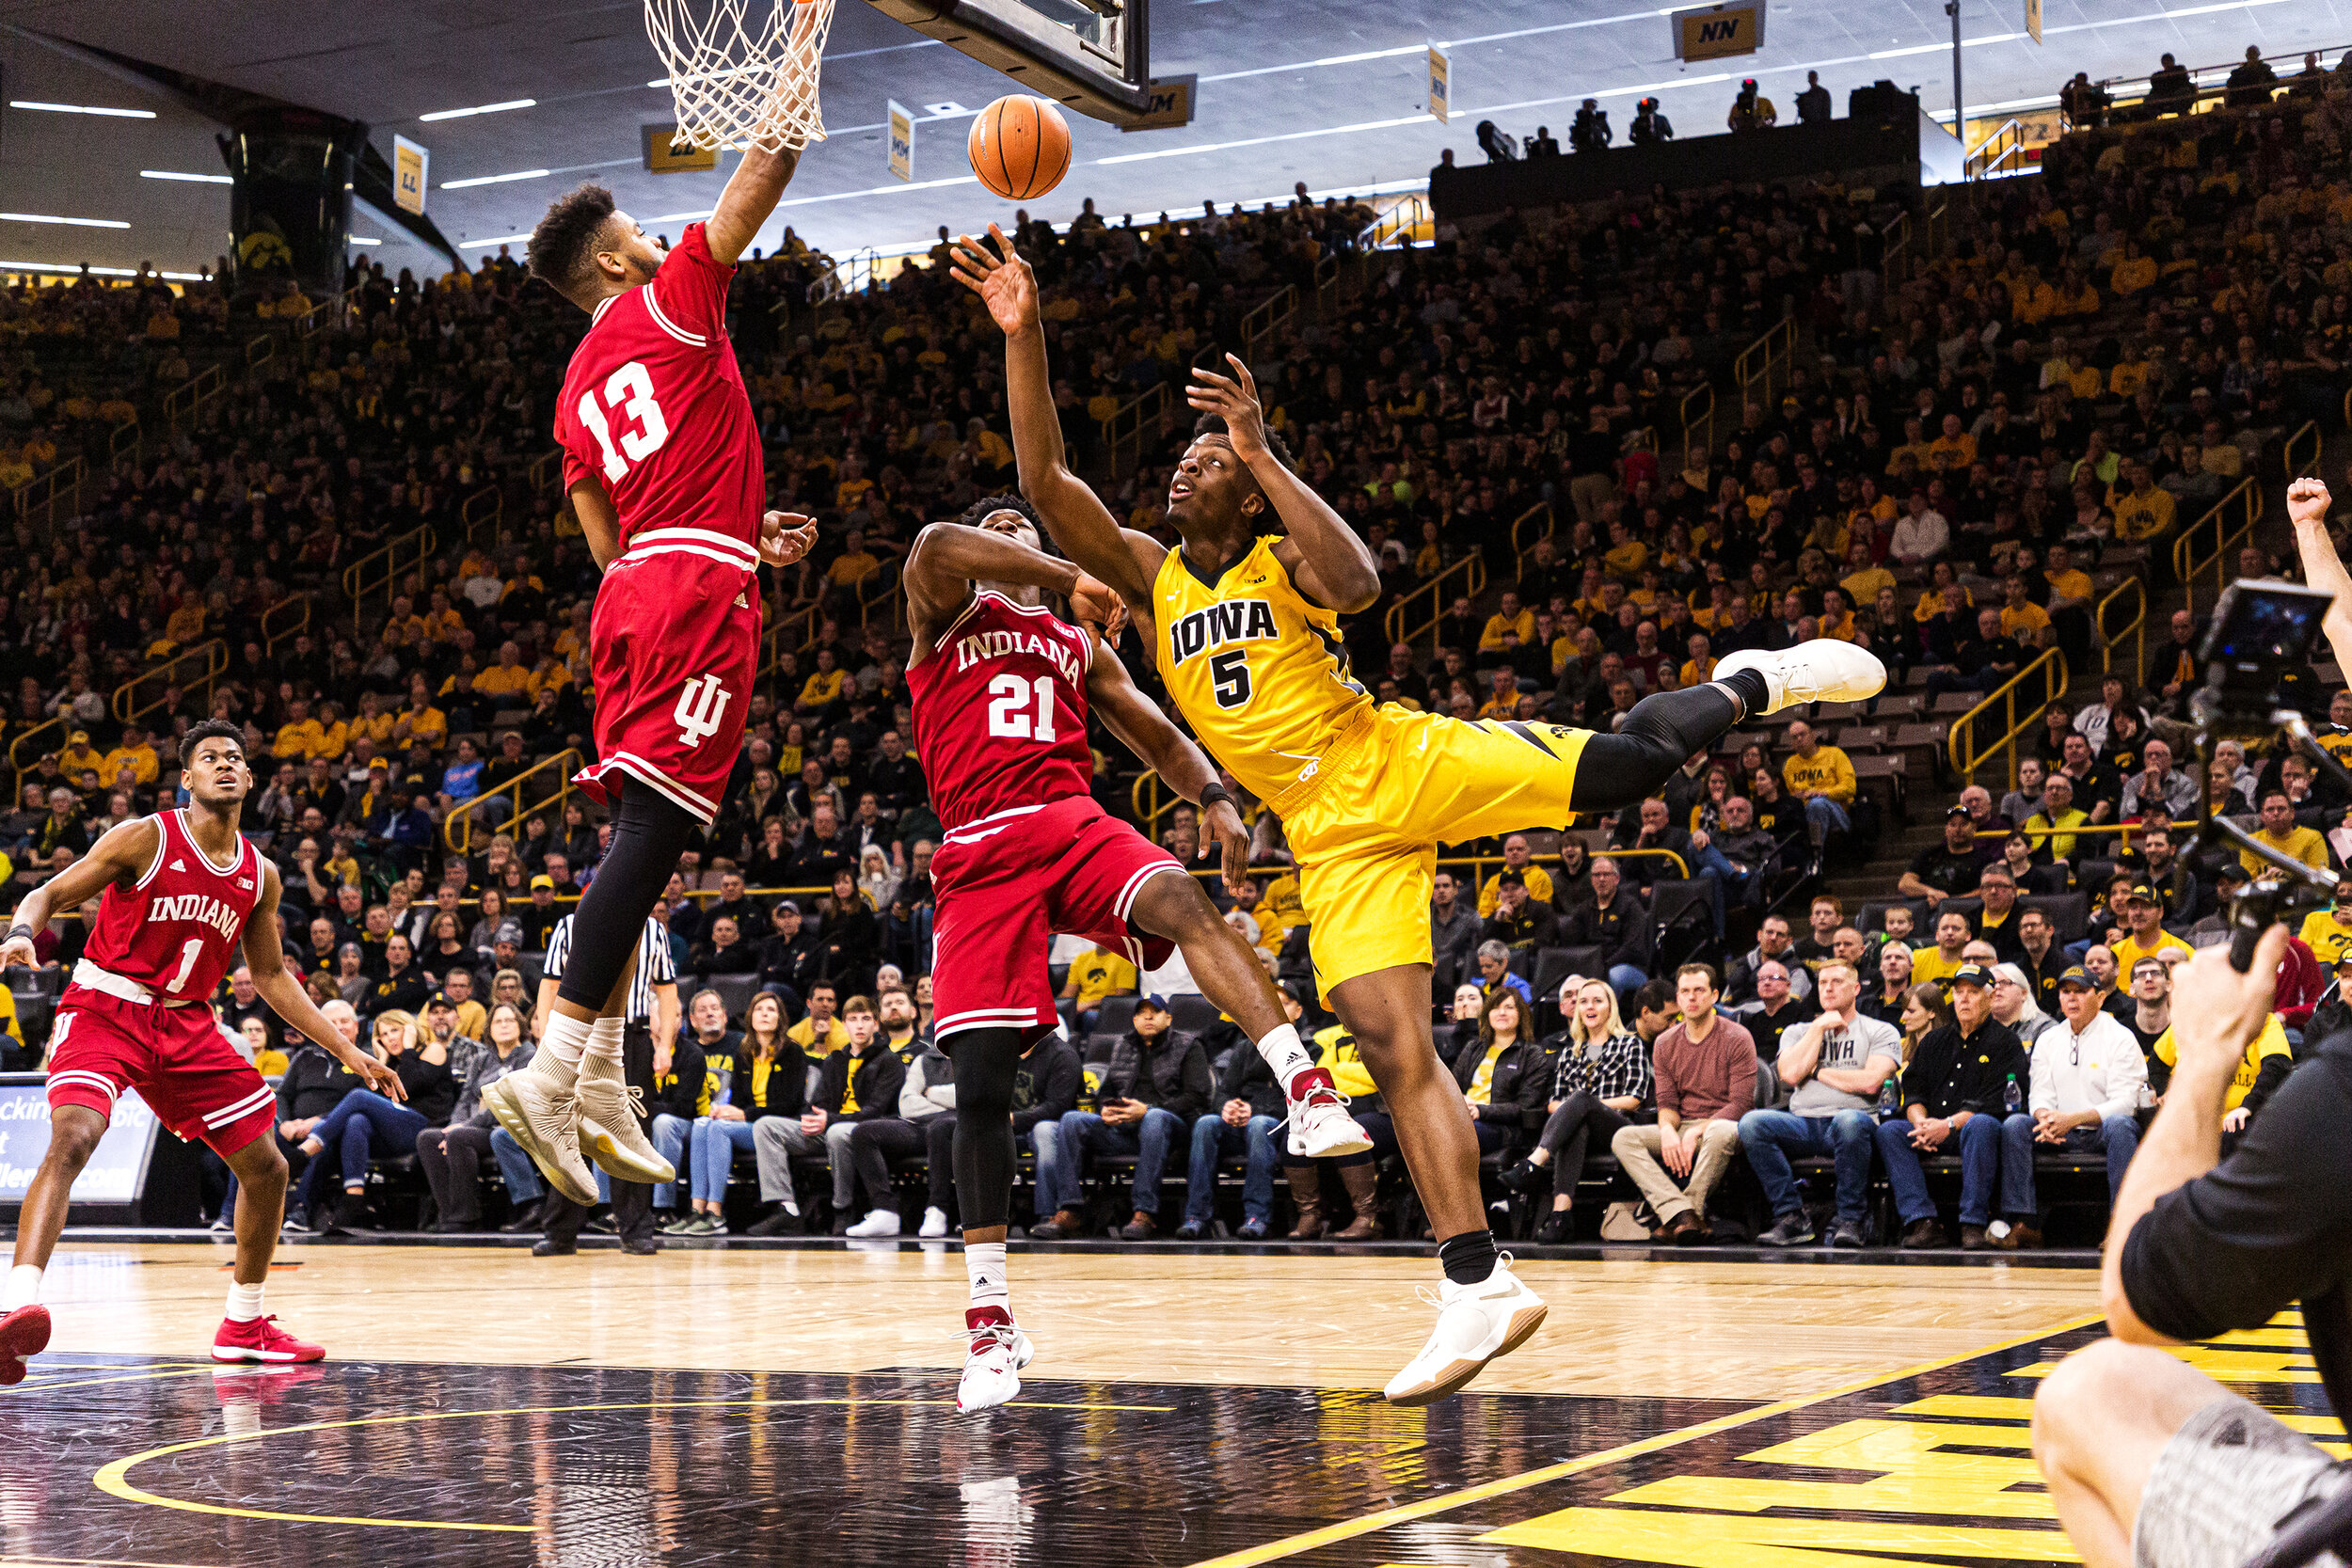  Iowa forward Tyler Cook launches a shot against Indiana University at Carver-Hawkeye Arena on Saturday, Feb. 17, 2018. The Hoosiers defeated the Hawkeyes 84 to 82.  